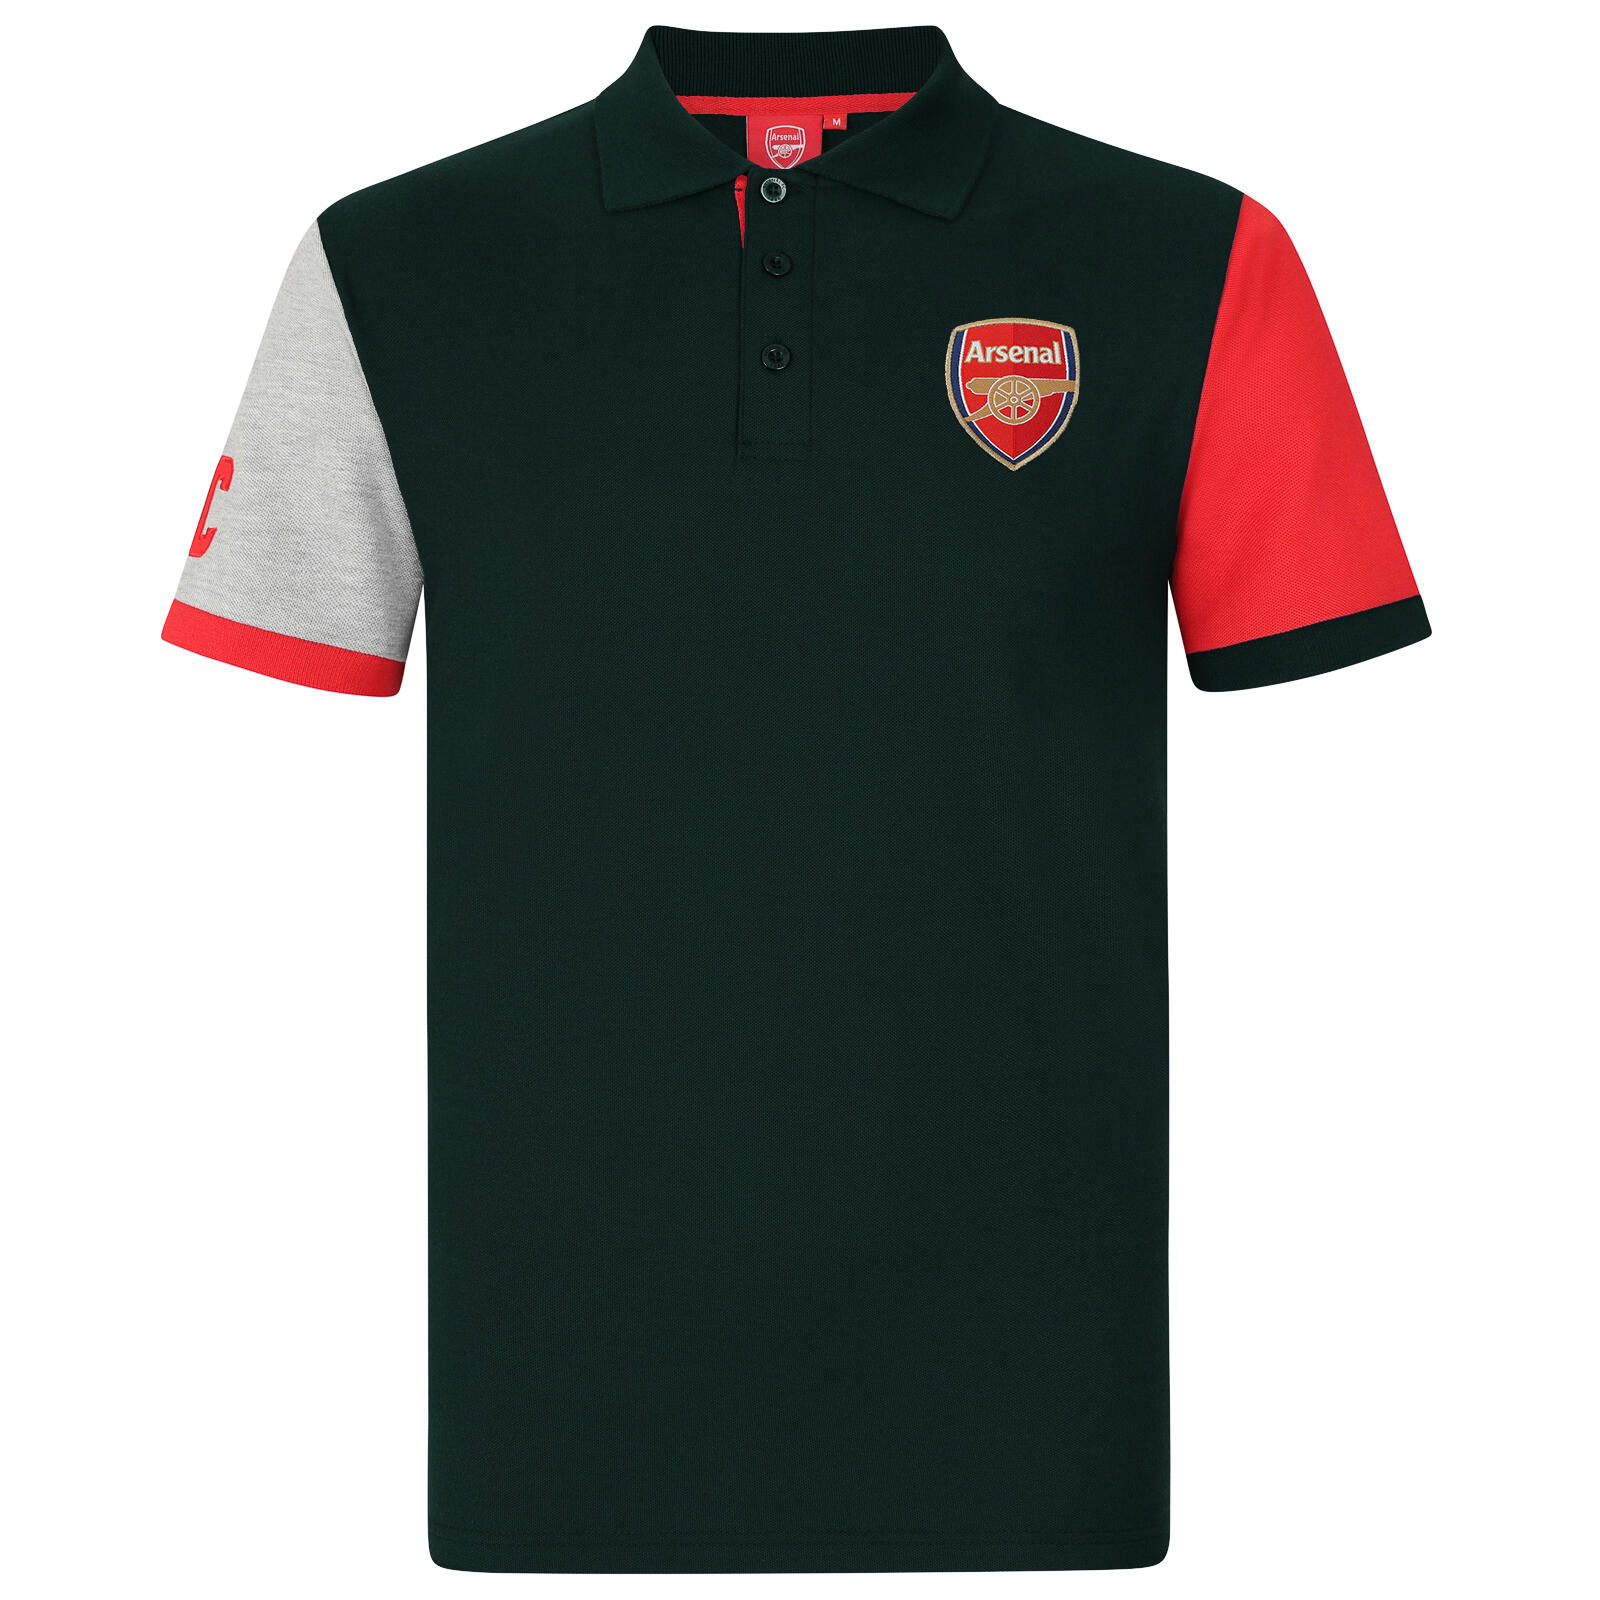 ARSENAL Arsenal FC Mens Polo Shirt Crest OFFICIAL Football Gift